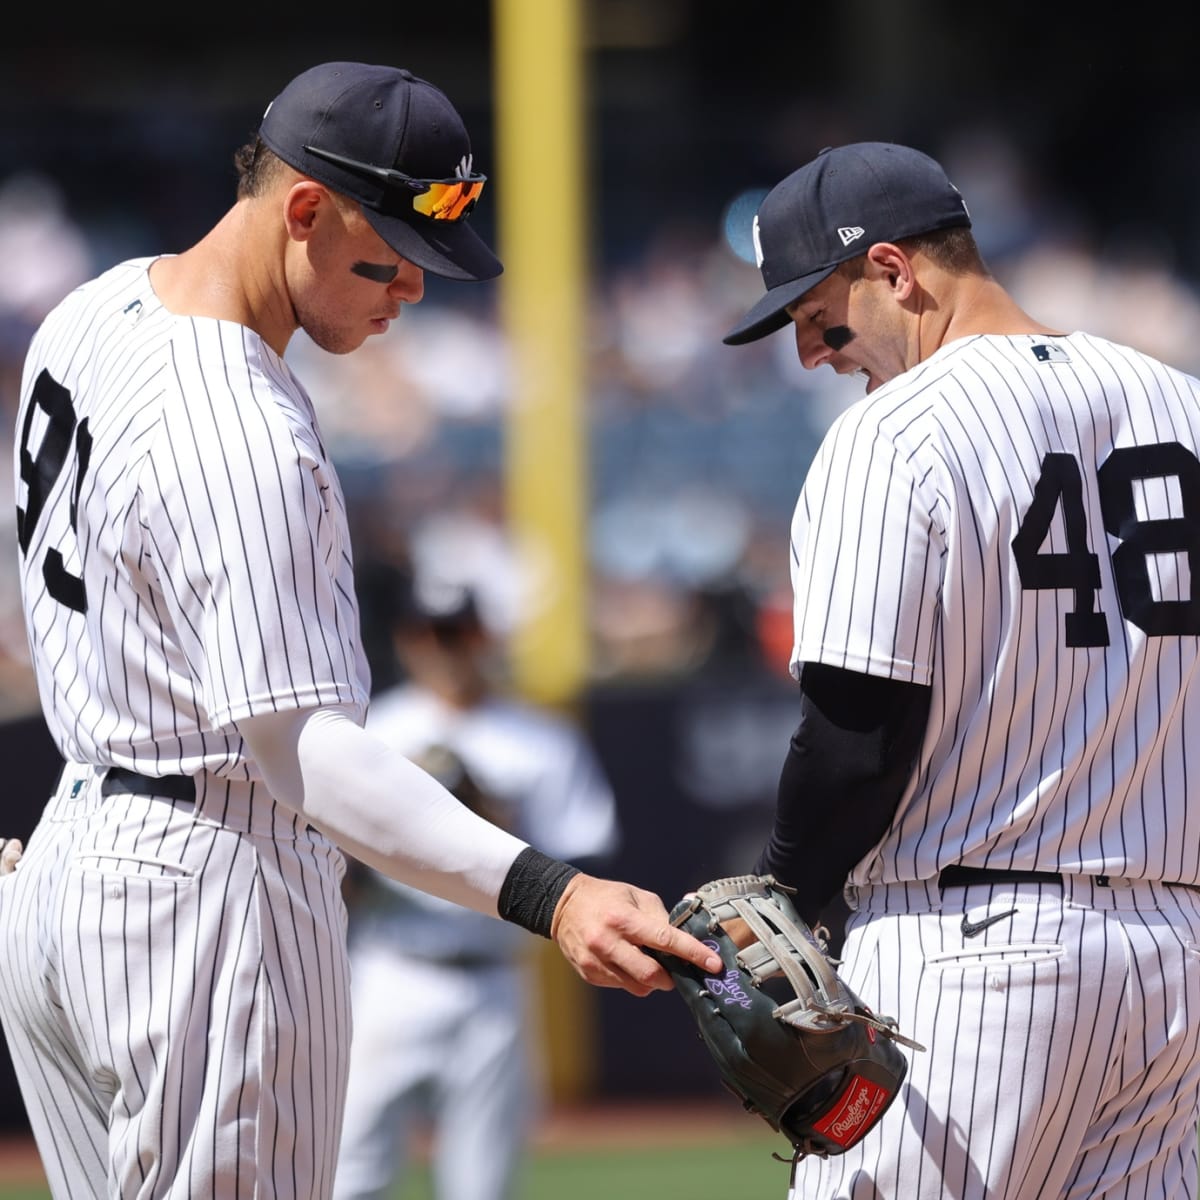 New York Yankees 1B Anthony Rizzo open to re-signing after this season -  Sports Illustrated NY Yankees News, Analysis and More